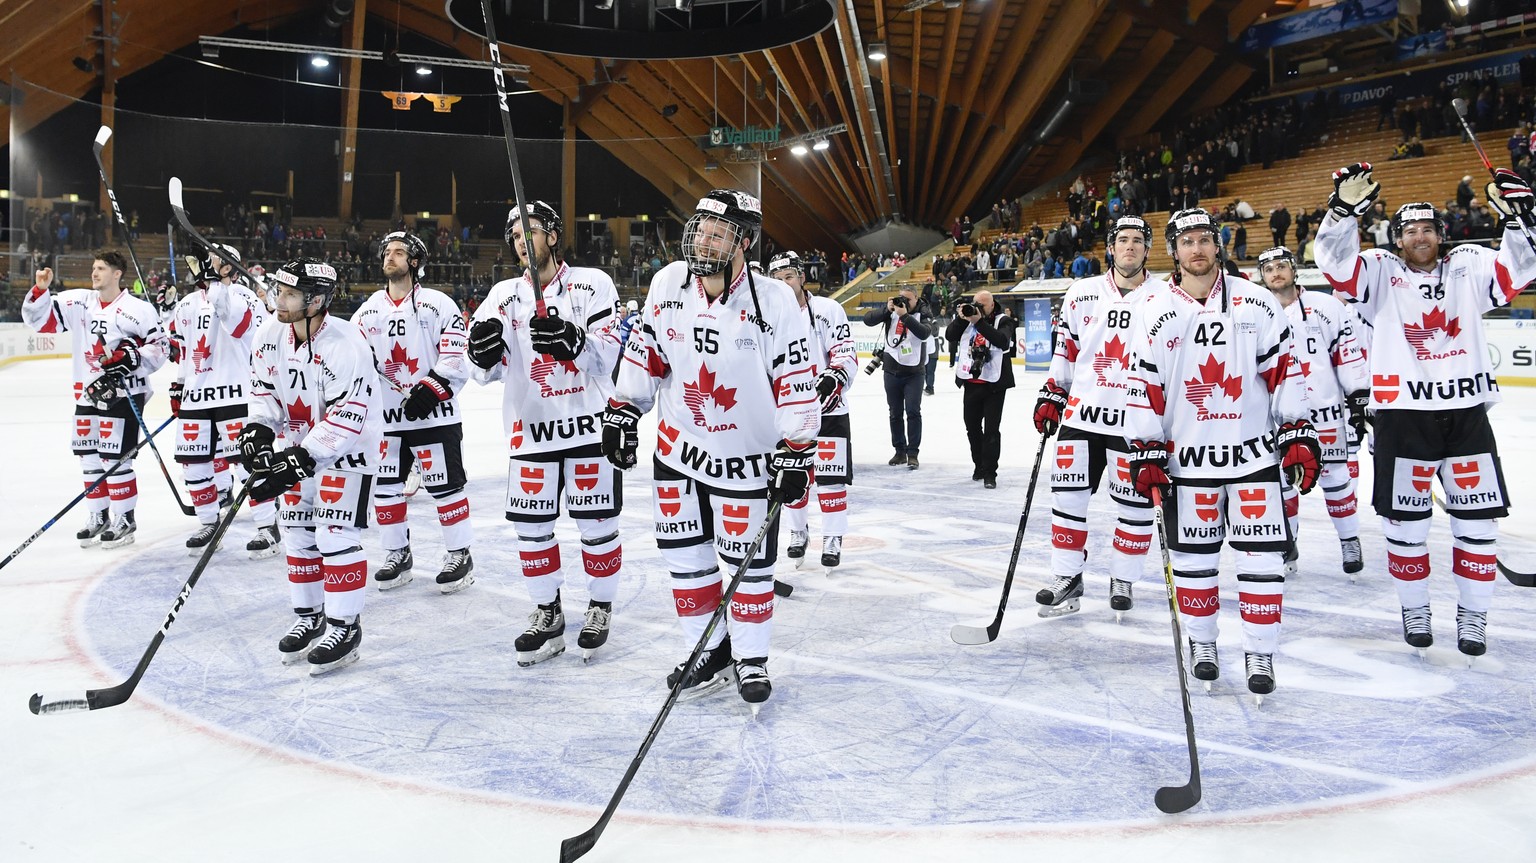 Team Canada celebrates after winning the game between HK Dinamo Minsk and Team Canada at the 90th Spengler Cup ice hockey tournament in Davos, Switzerland, Friday, December 30, 2016. (KEYSTONE/Gian Eh ...